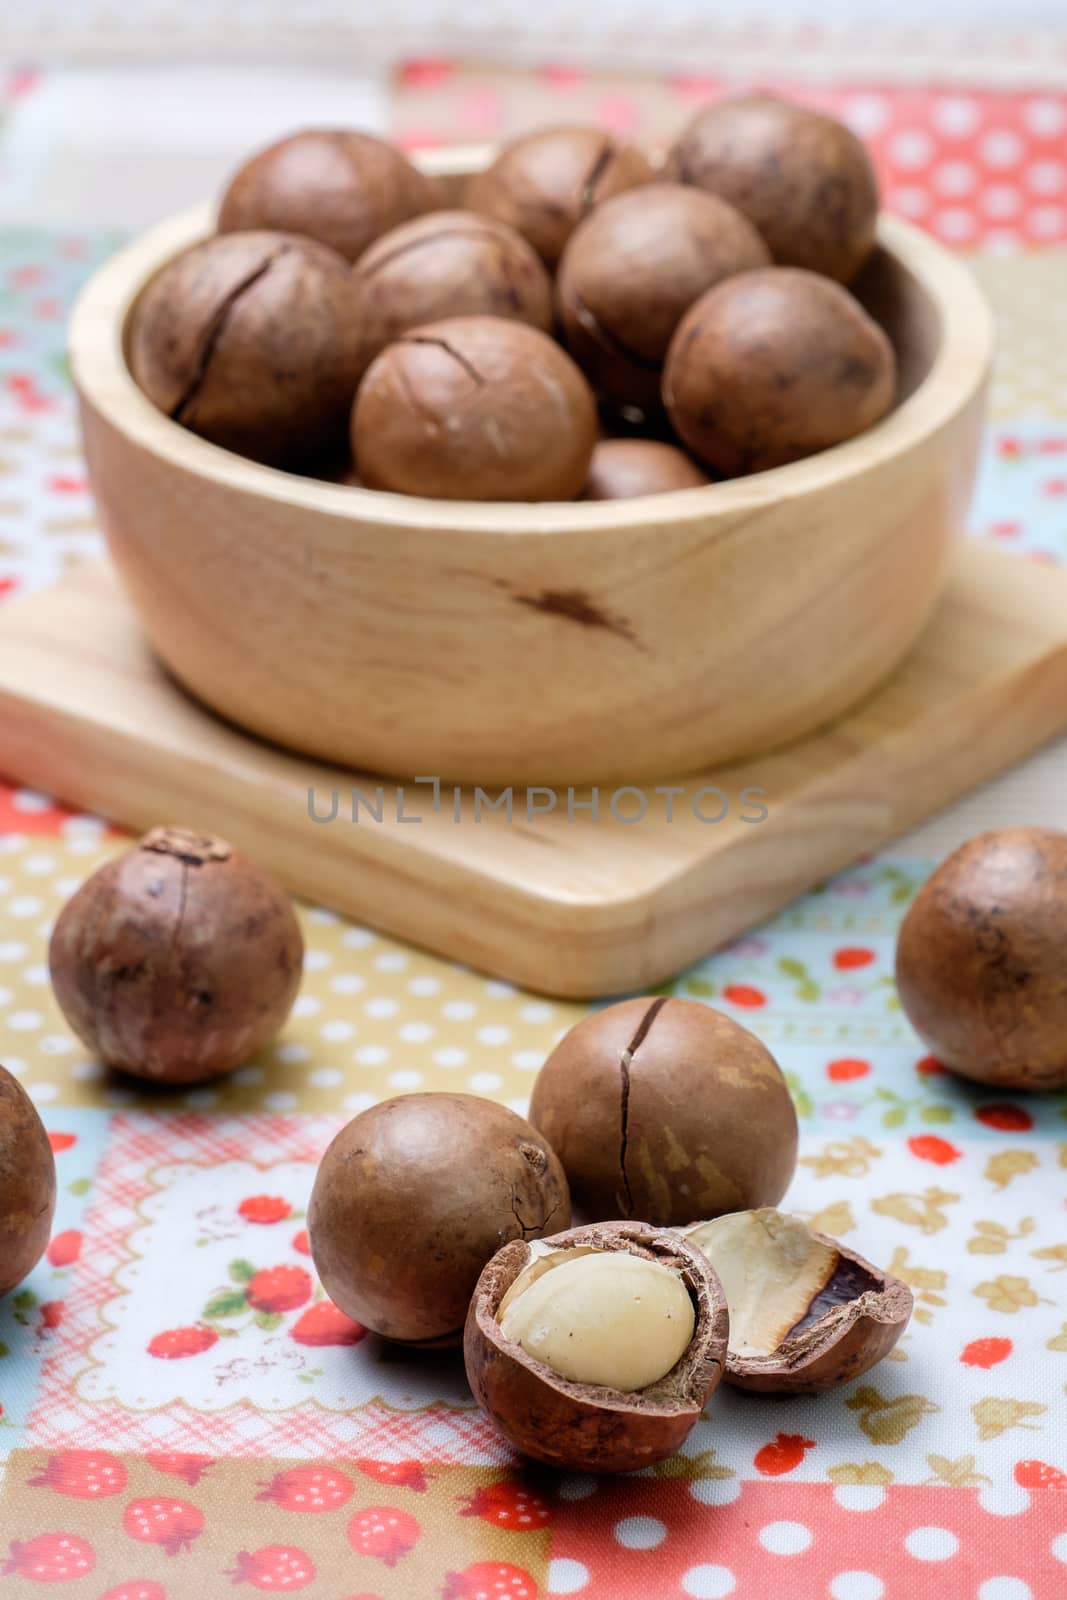 Macadamia on napery and wooden bowl by zneb076